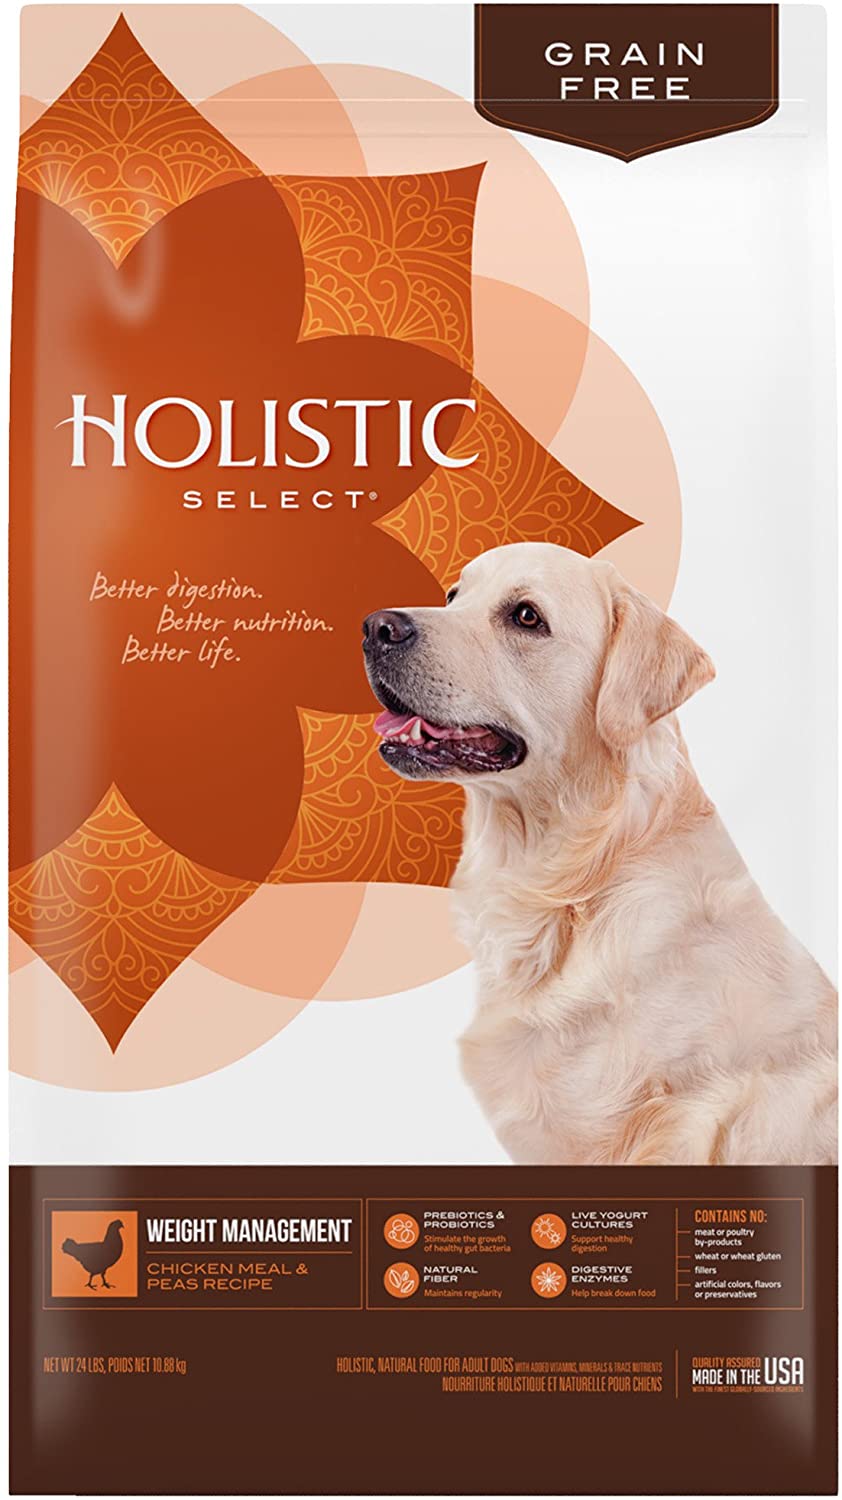 Holistic Select Natural Dry Dog Food Grain Free Weight Management Chicken Meal & Peas